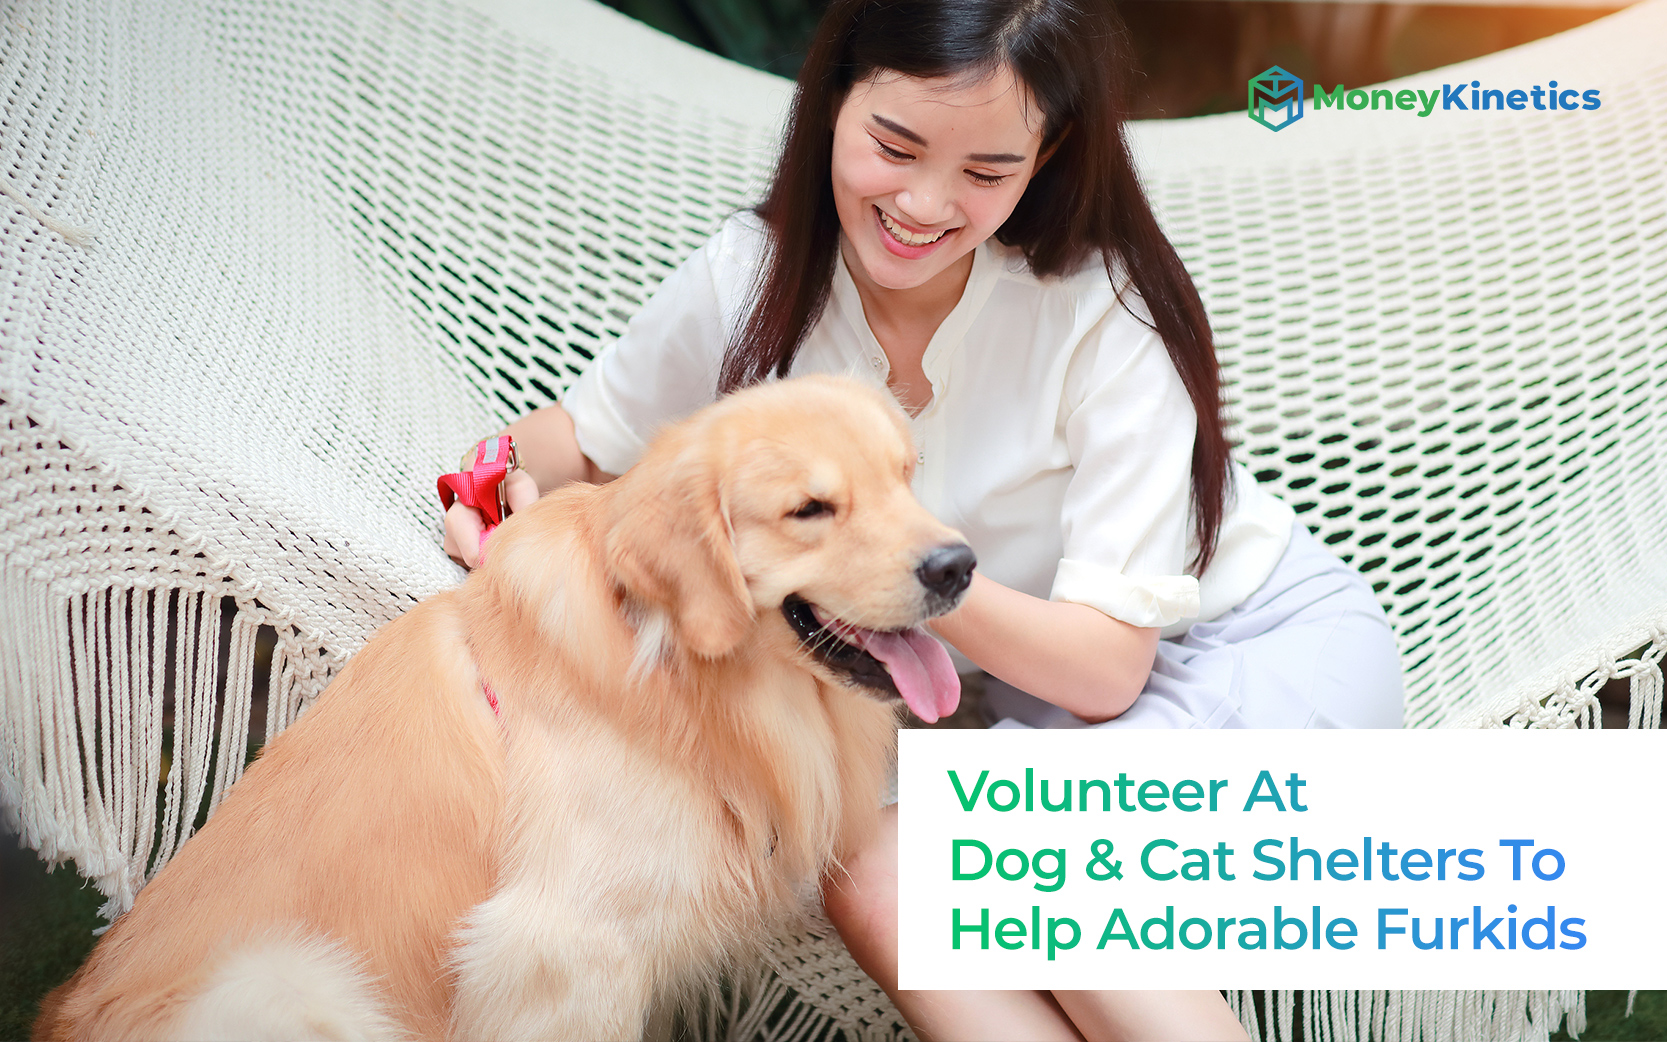 9 Dog And Cat Shelters You Can Volunteer At To Help Adorable Furkids In Singapore